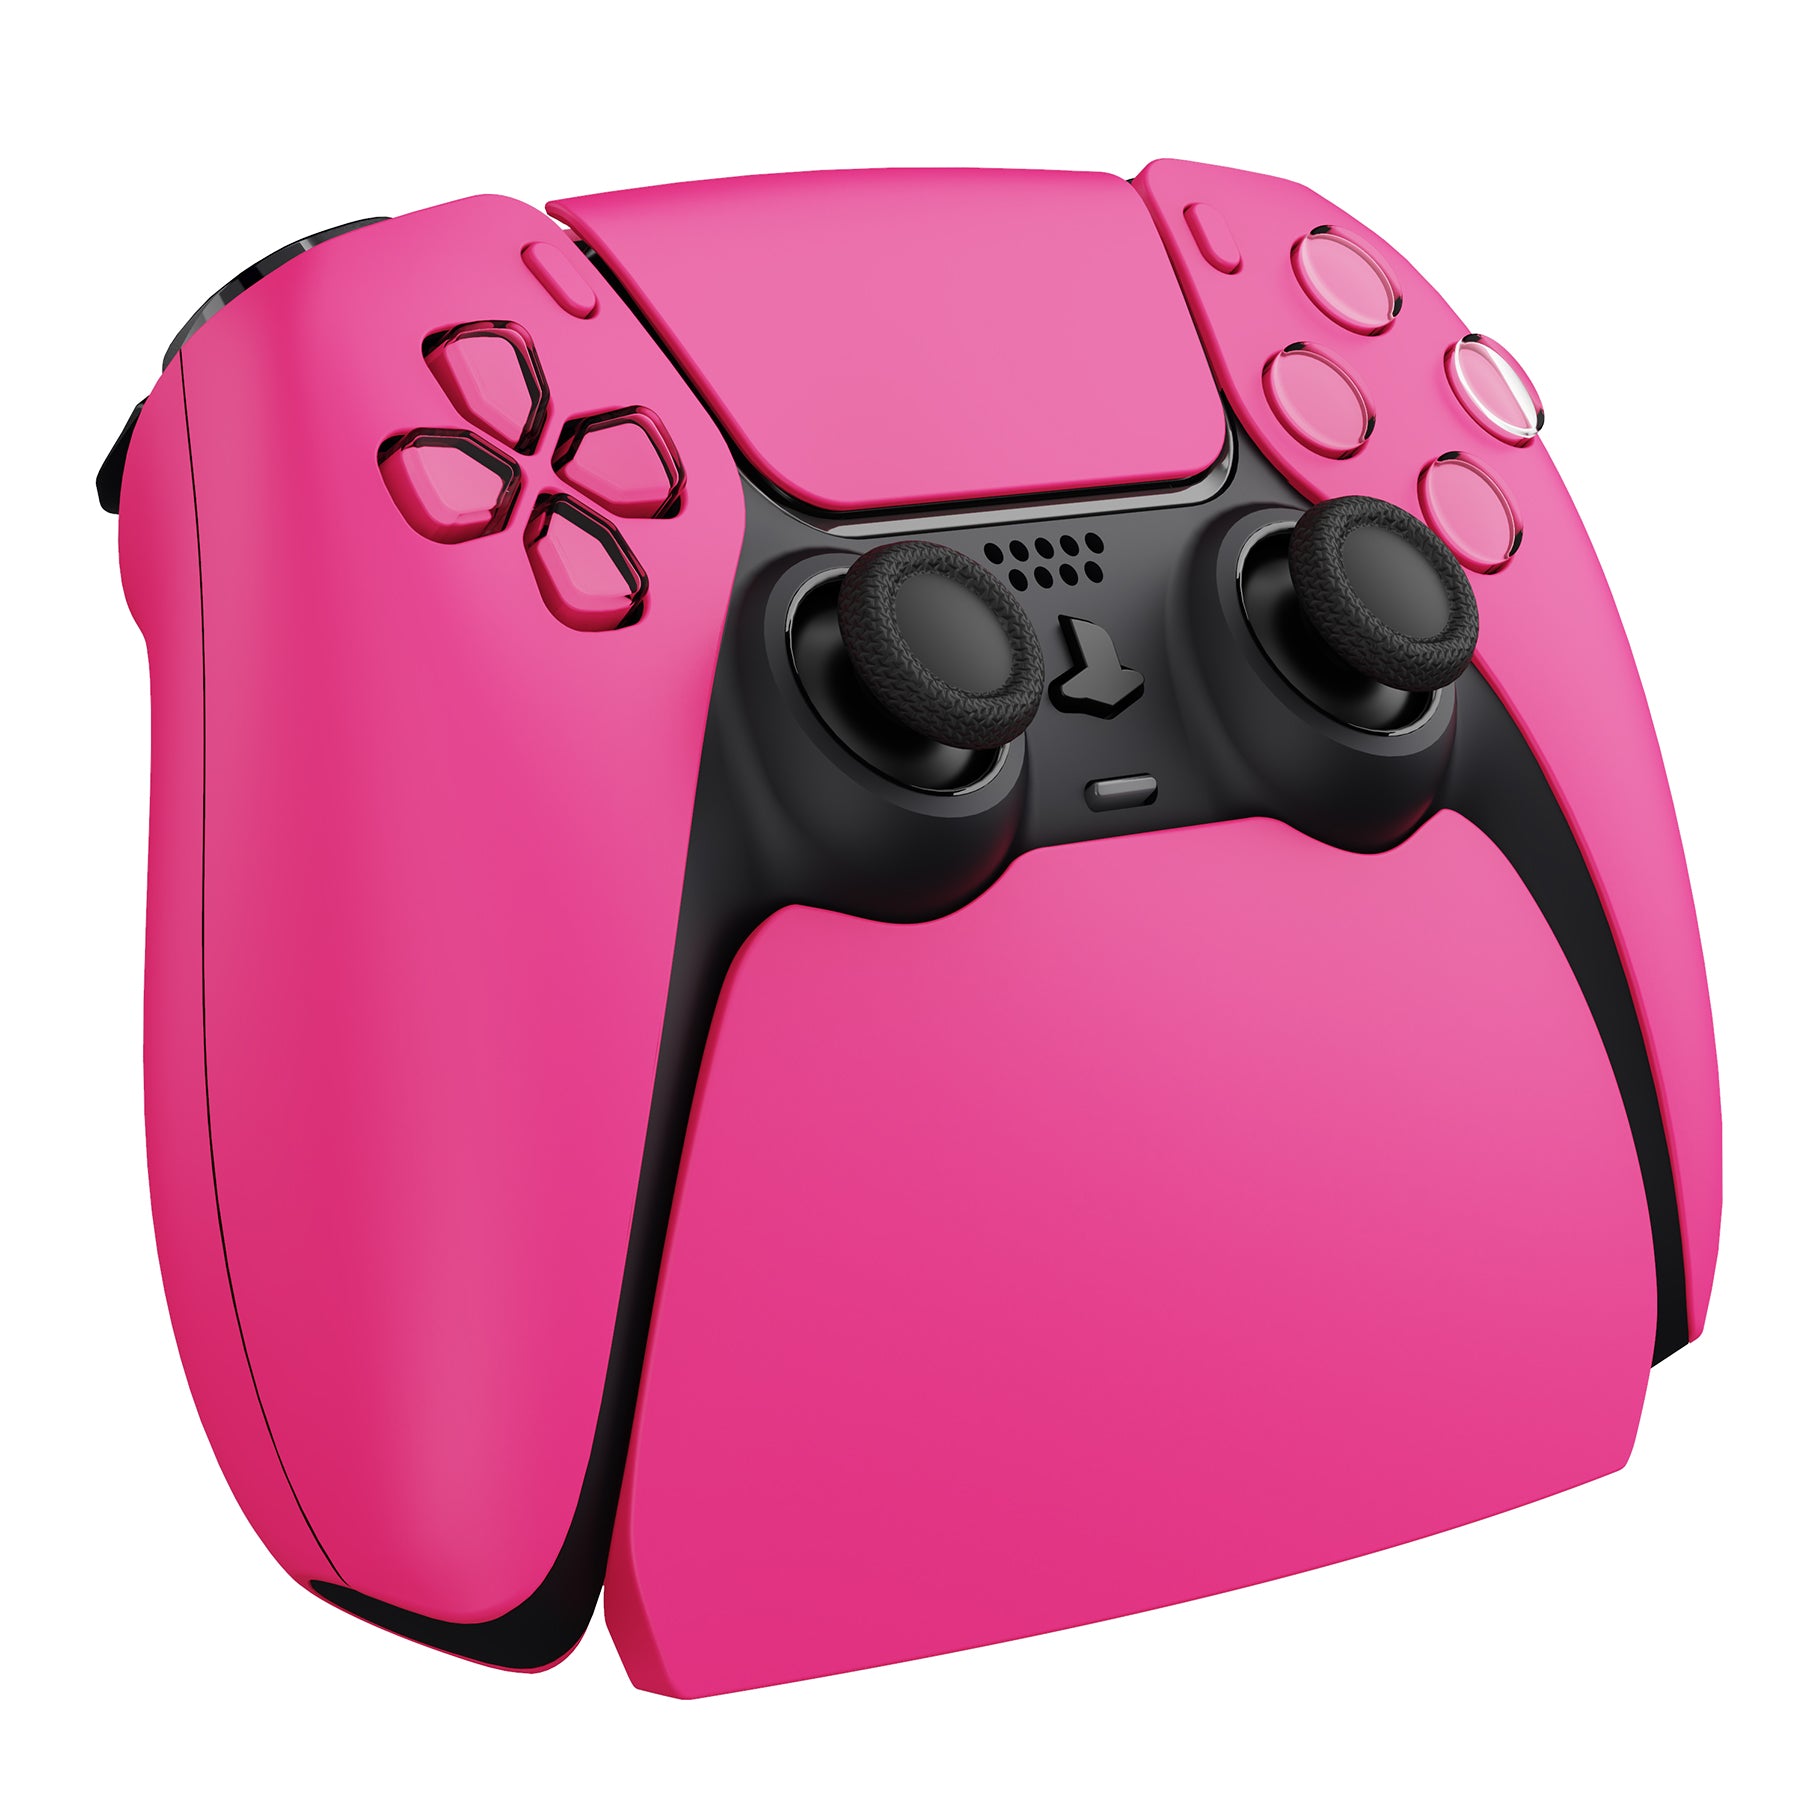 PlayVital Nova Pink Controller Display Stand for PS5, Gamepad Accessories Desk Holder for PS5 Controller with Rubber Pads - PFPJ080 PlayVital